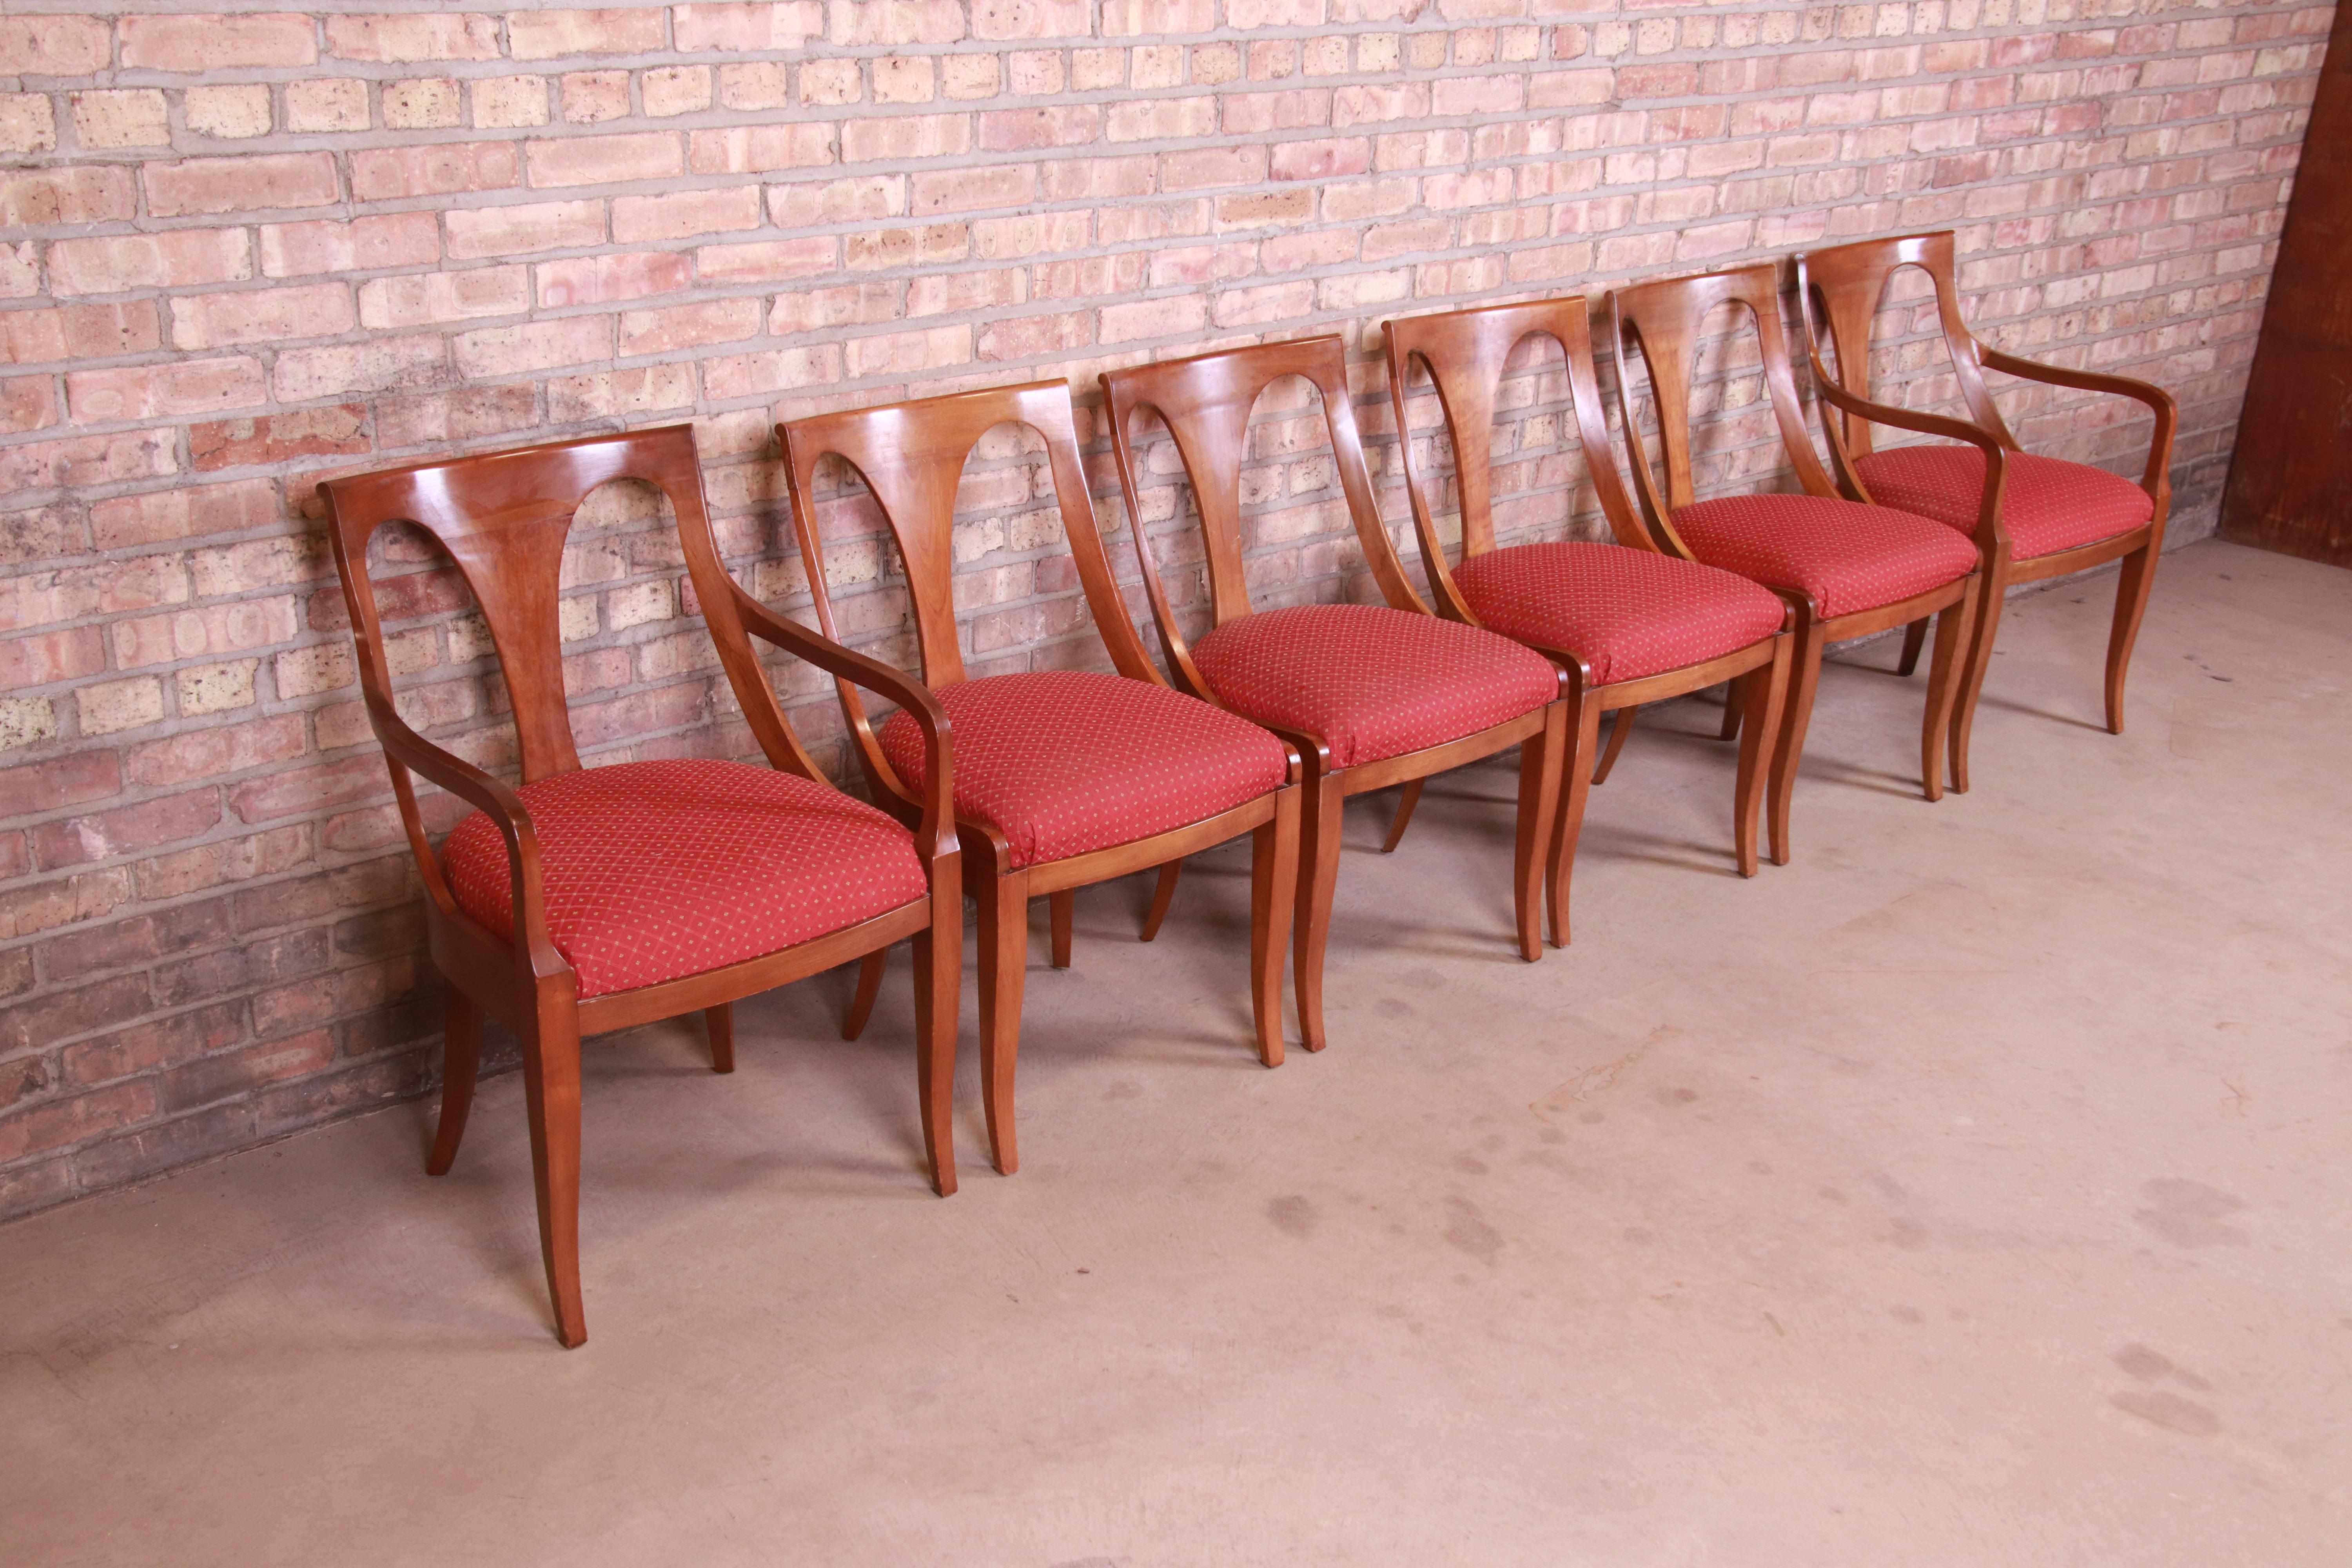 20th Century Kindel Furniture Regency Cherry Wood Dining Chairs, Set of Six